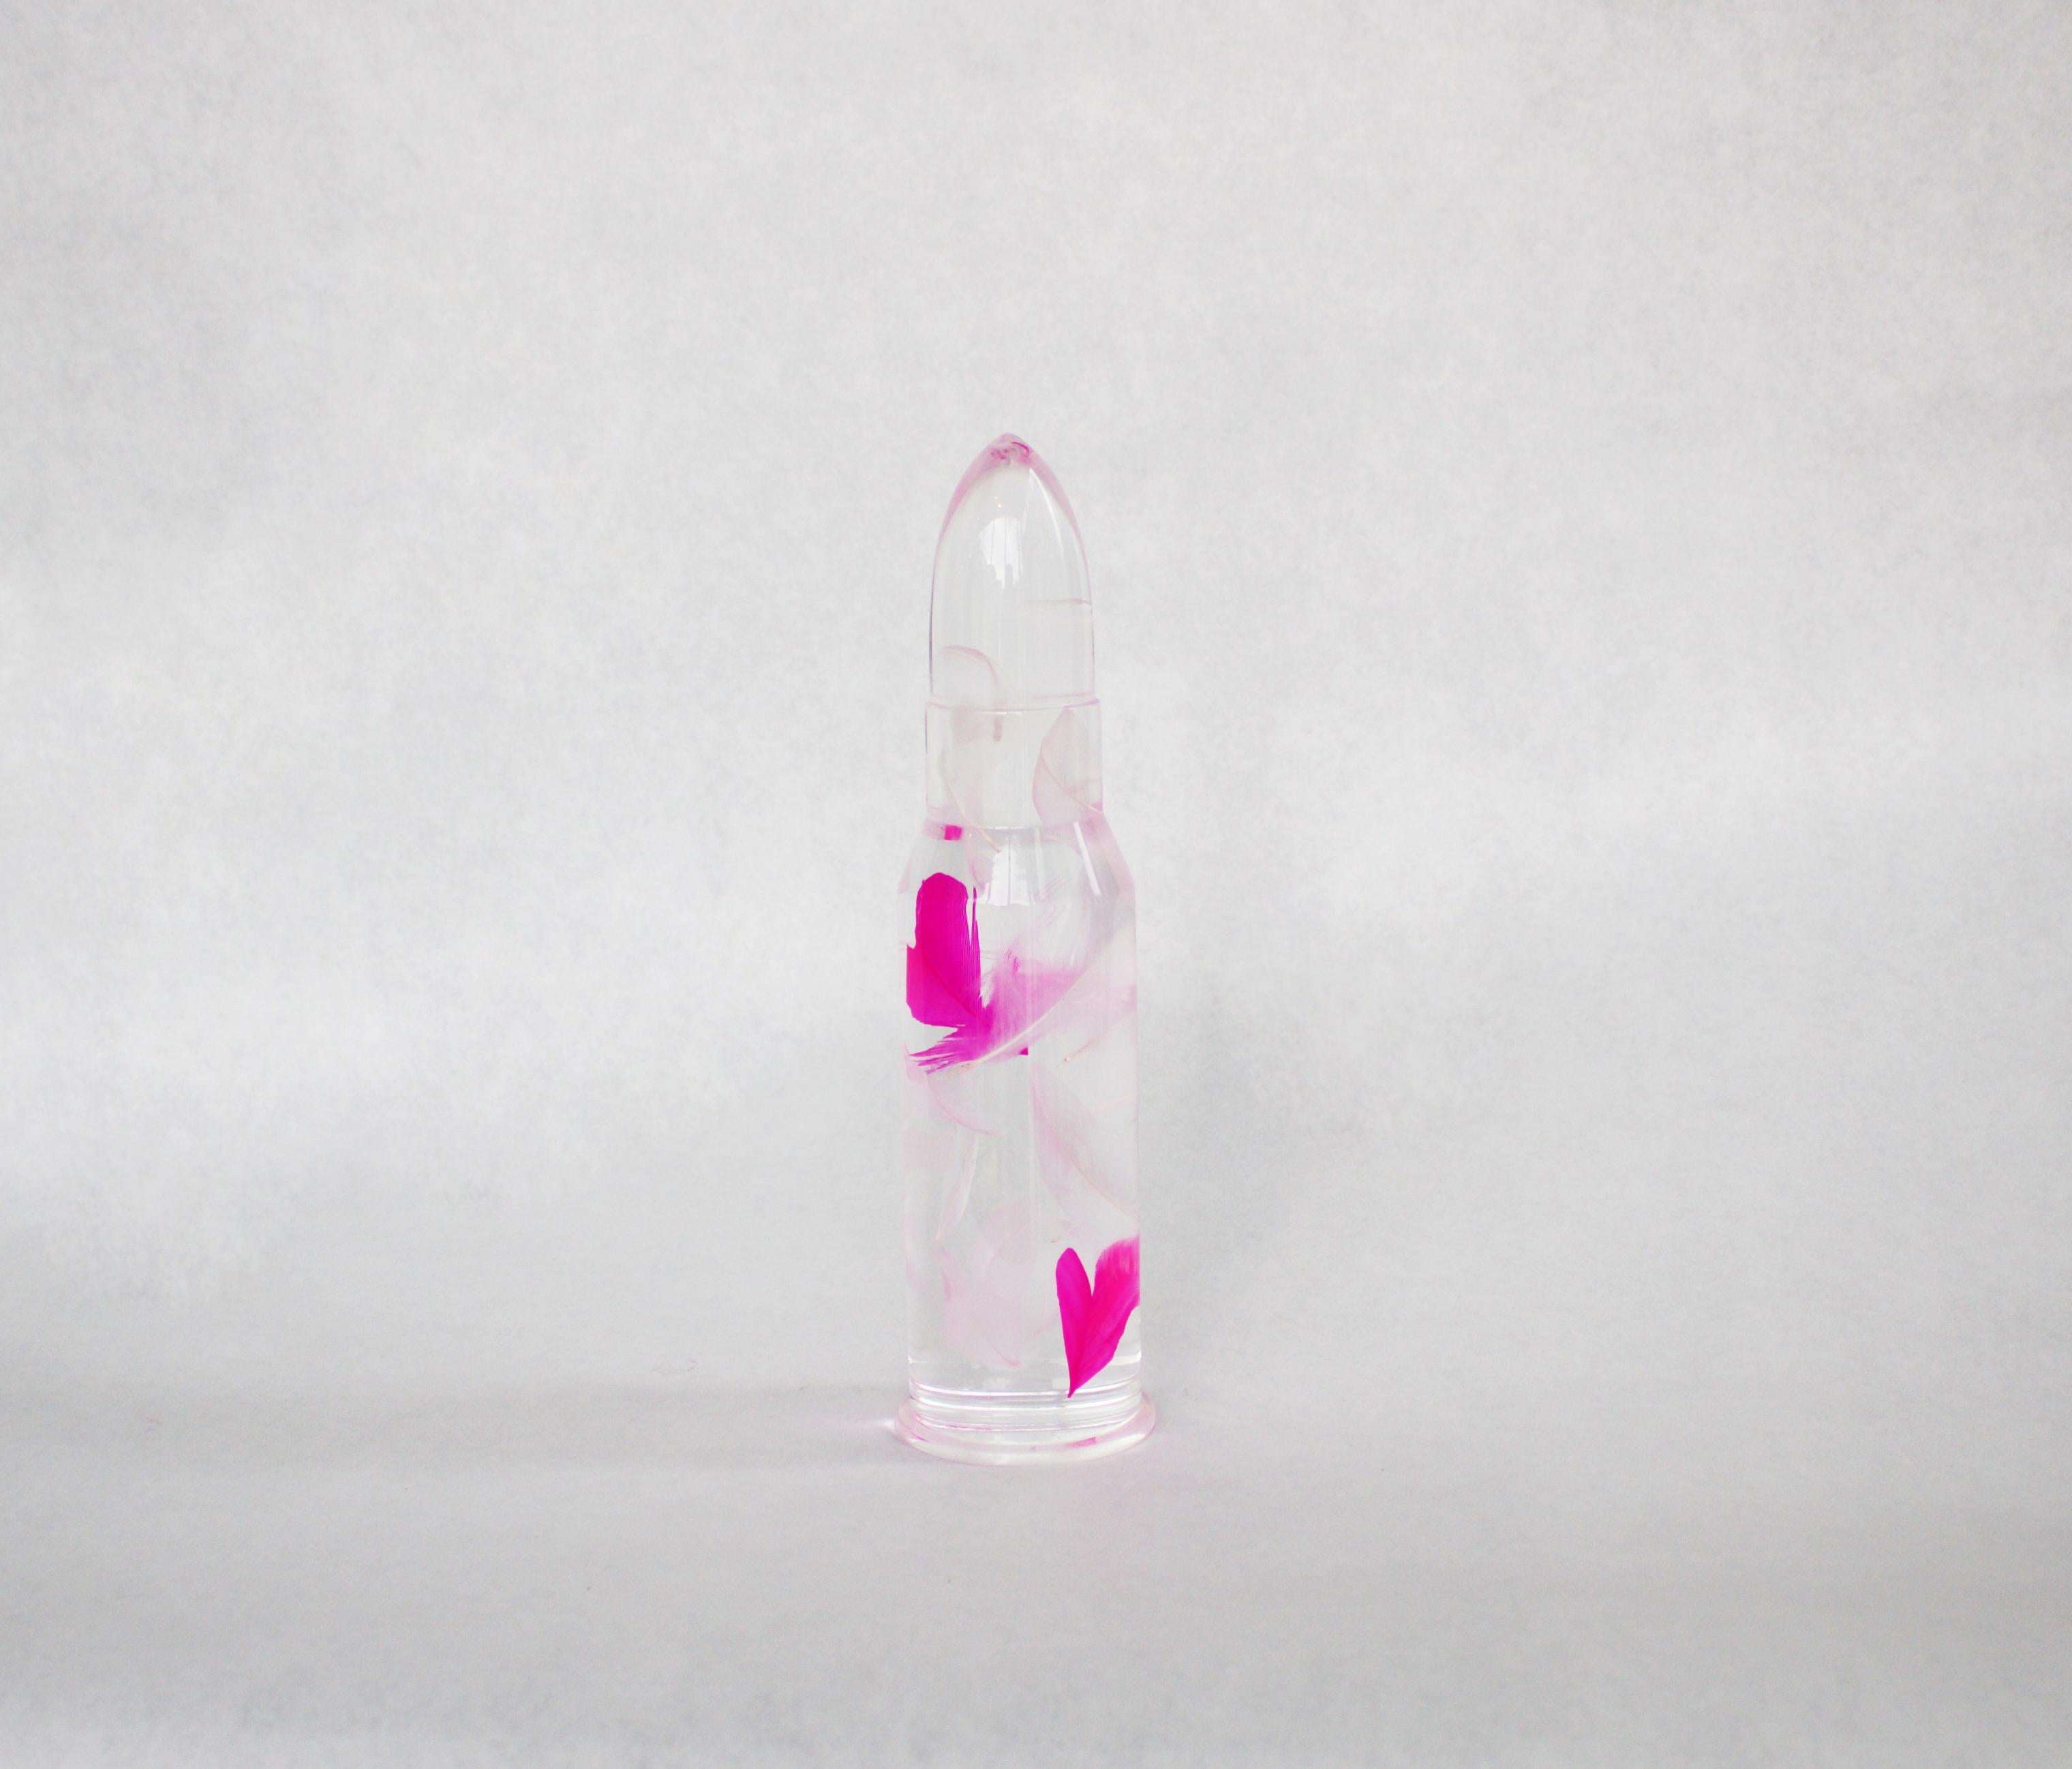 Faux white and hot pink feathers suspended in Resin bullet form.

About the Artist
Helder Batista is a self-taught artist who works predominantly in sculpture medium. Born in 1964 in Paris and now living and working near Cahors, he describes the